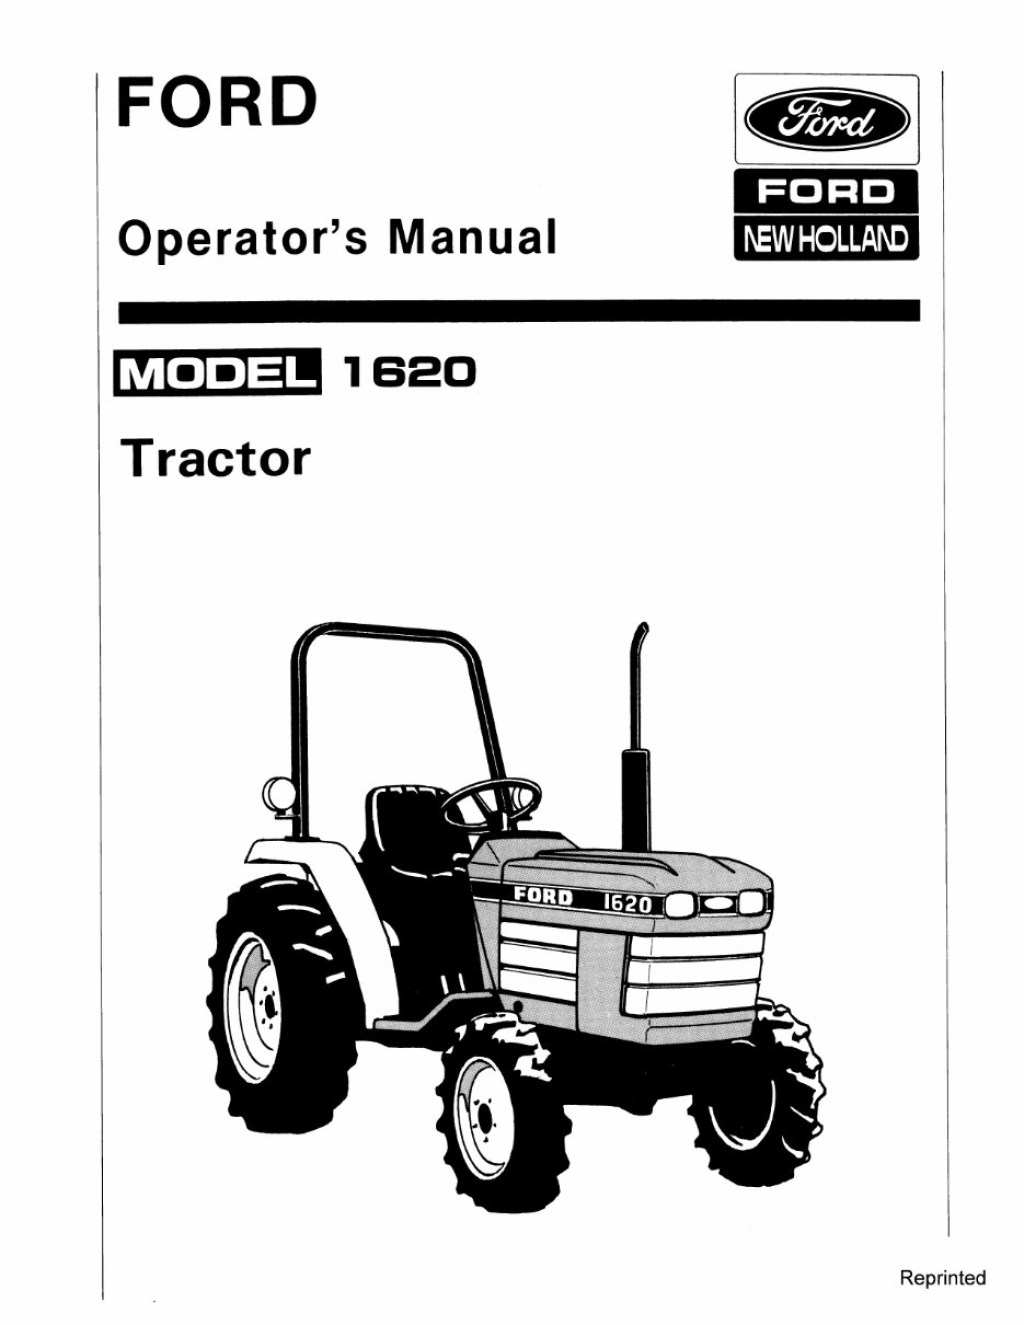 Picture of: FORD New Holland  Tractor Operators Manual